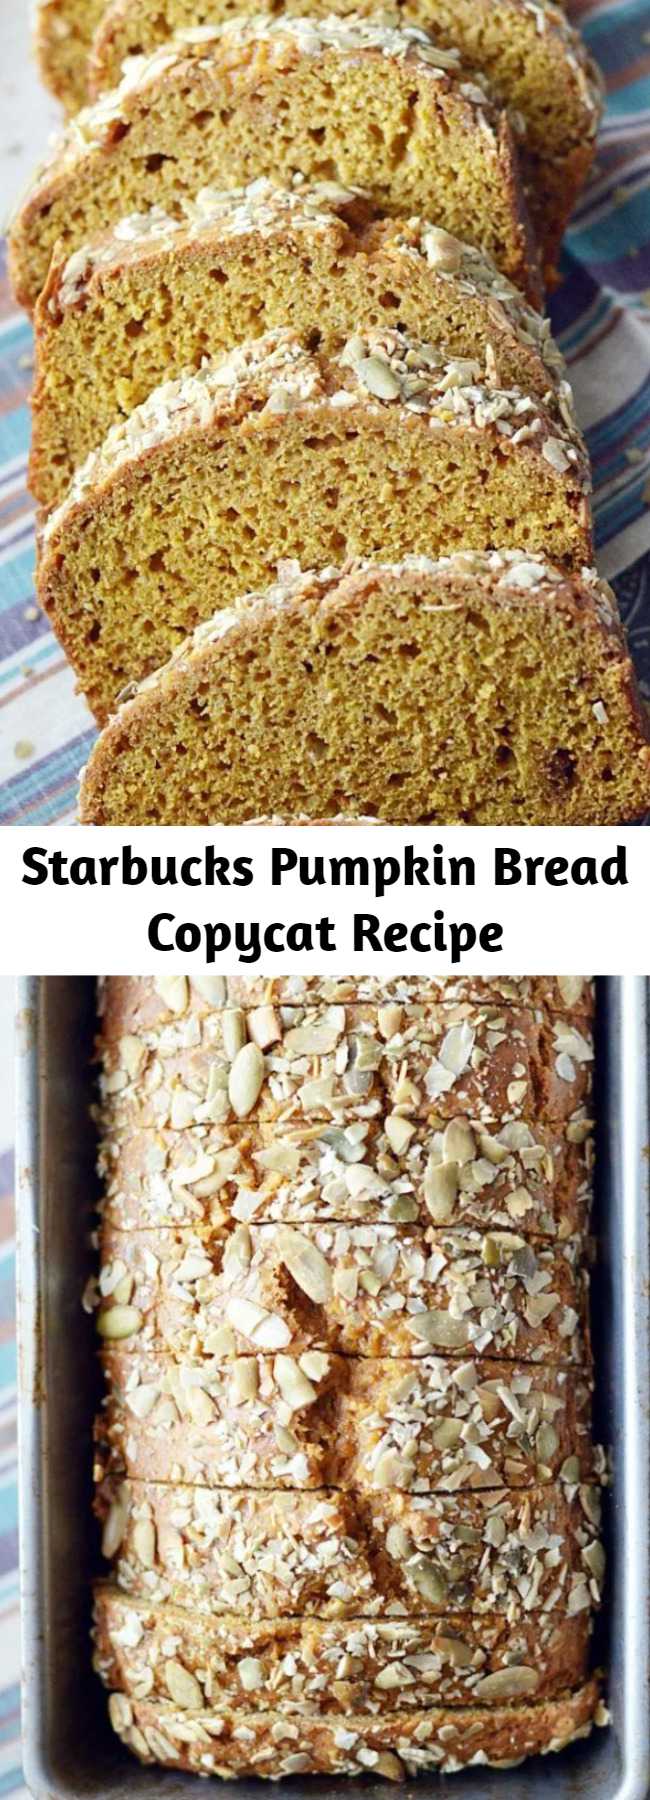 Starbucks Pumpkin Bread Copycat Recipe - Thick moist slices of pumpkin bread that perfectly mimic everyone's favorite loaf at Starbucks. You'll love this homemade copycat recipe even more than the real thing!